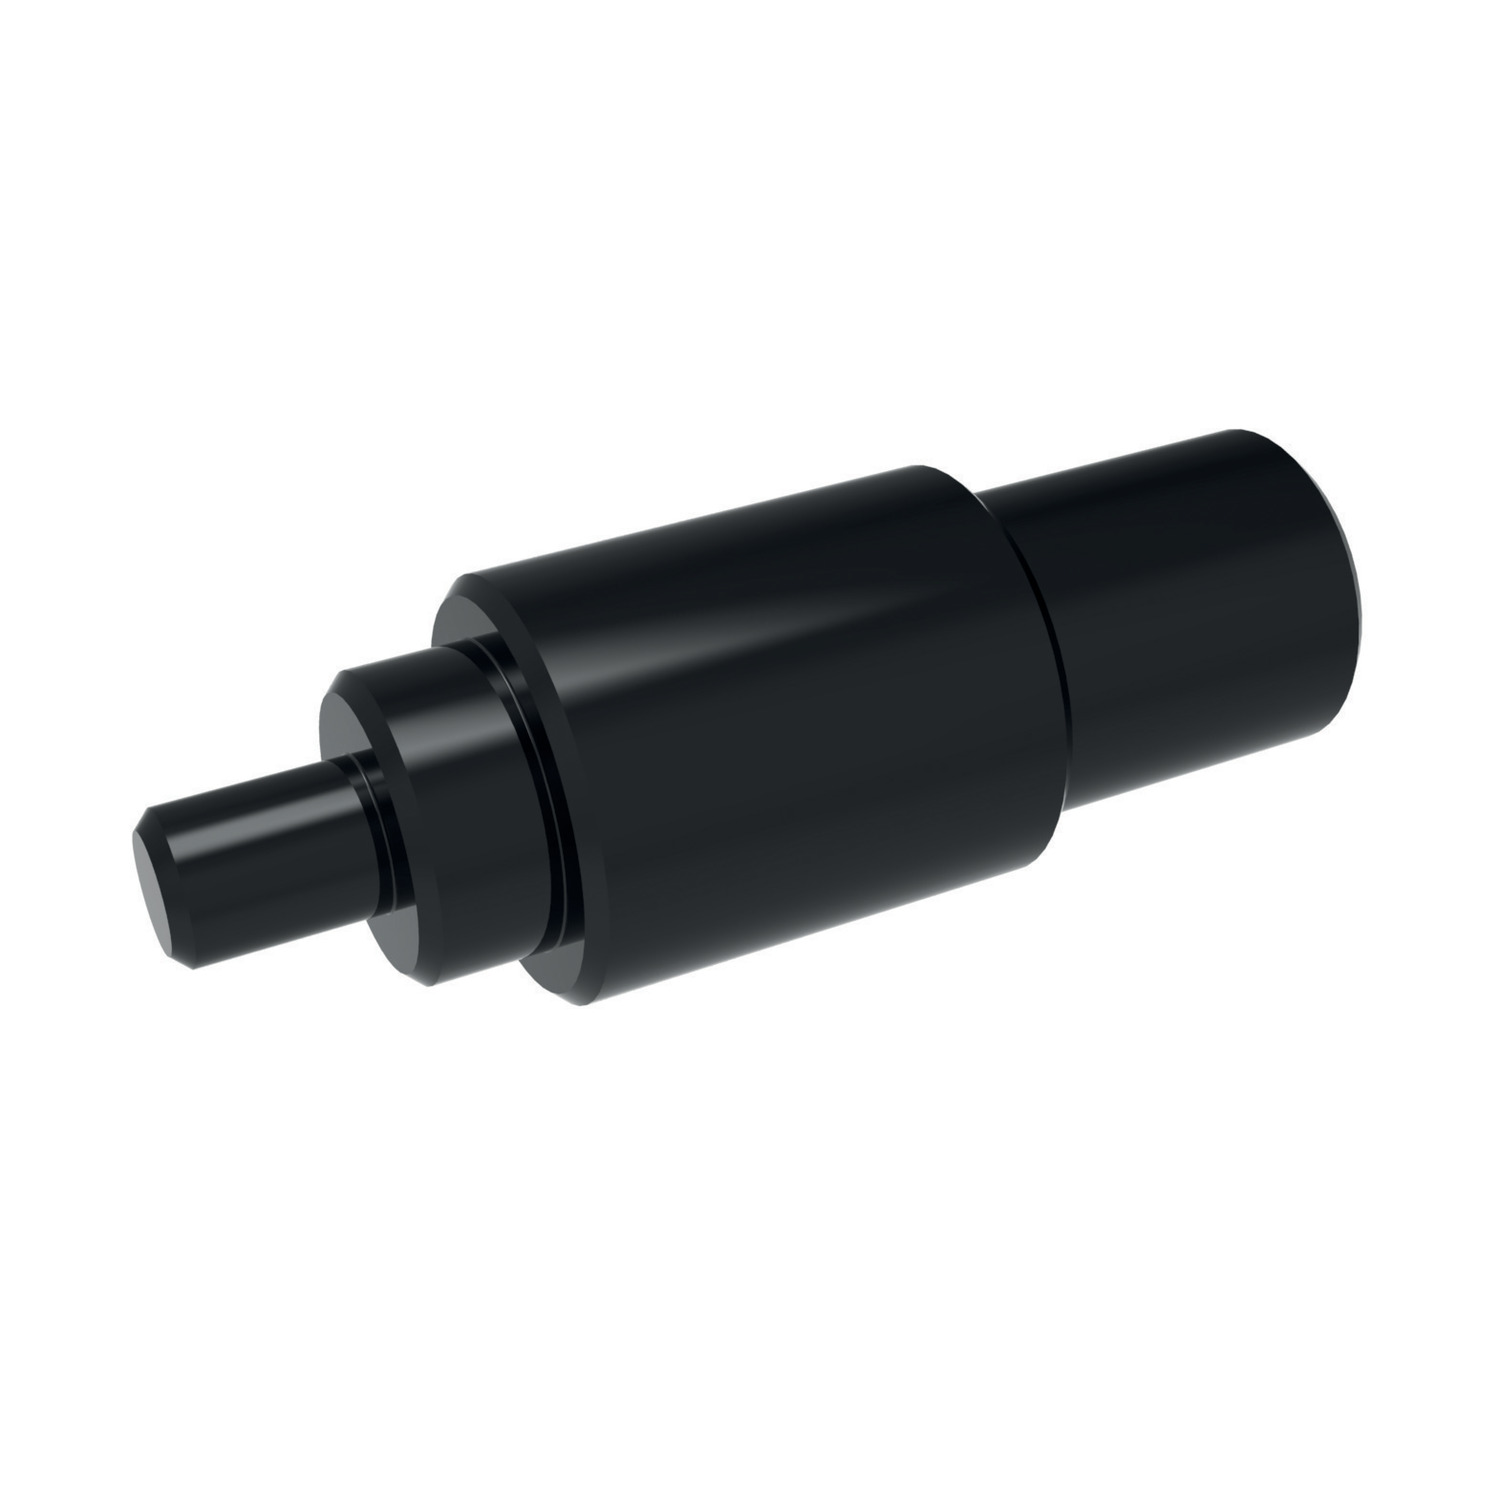 Installation Tool - Metric - Heavy Duty The simple installation tool for all our threaded inserts.